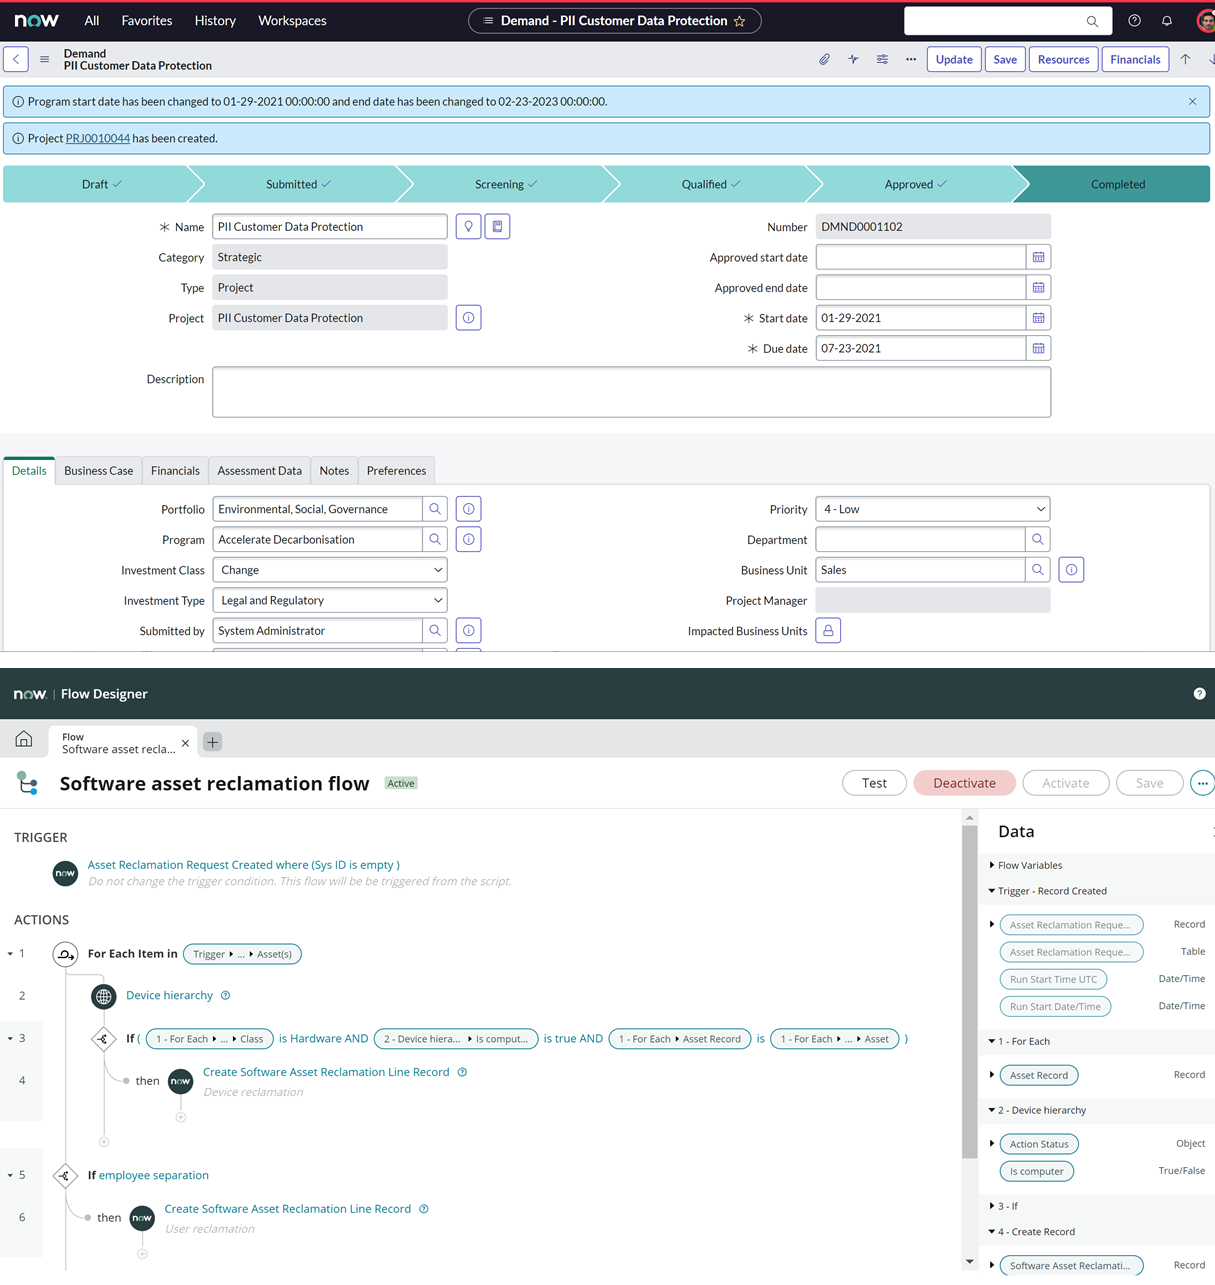 Configuring workflows and automate tasks - quite easy with ServiceNow!